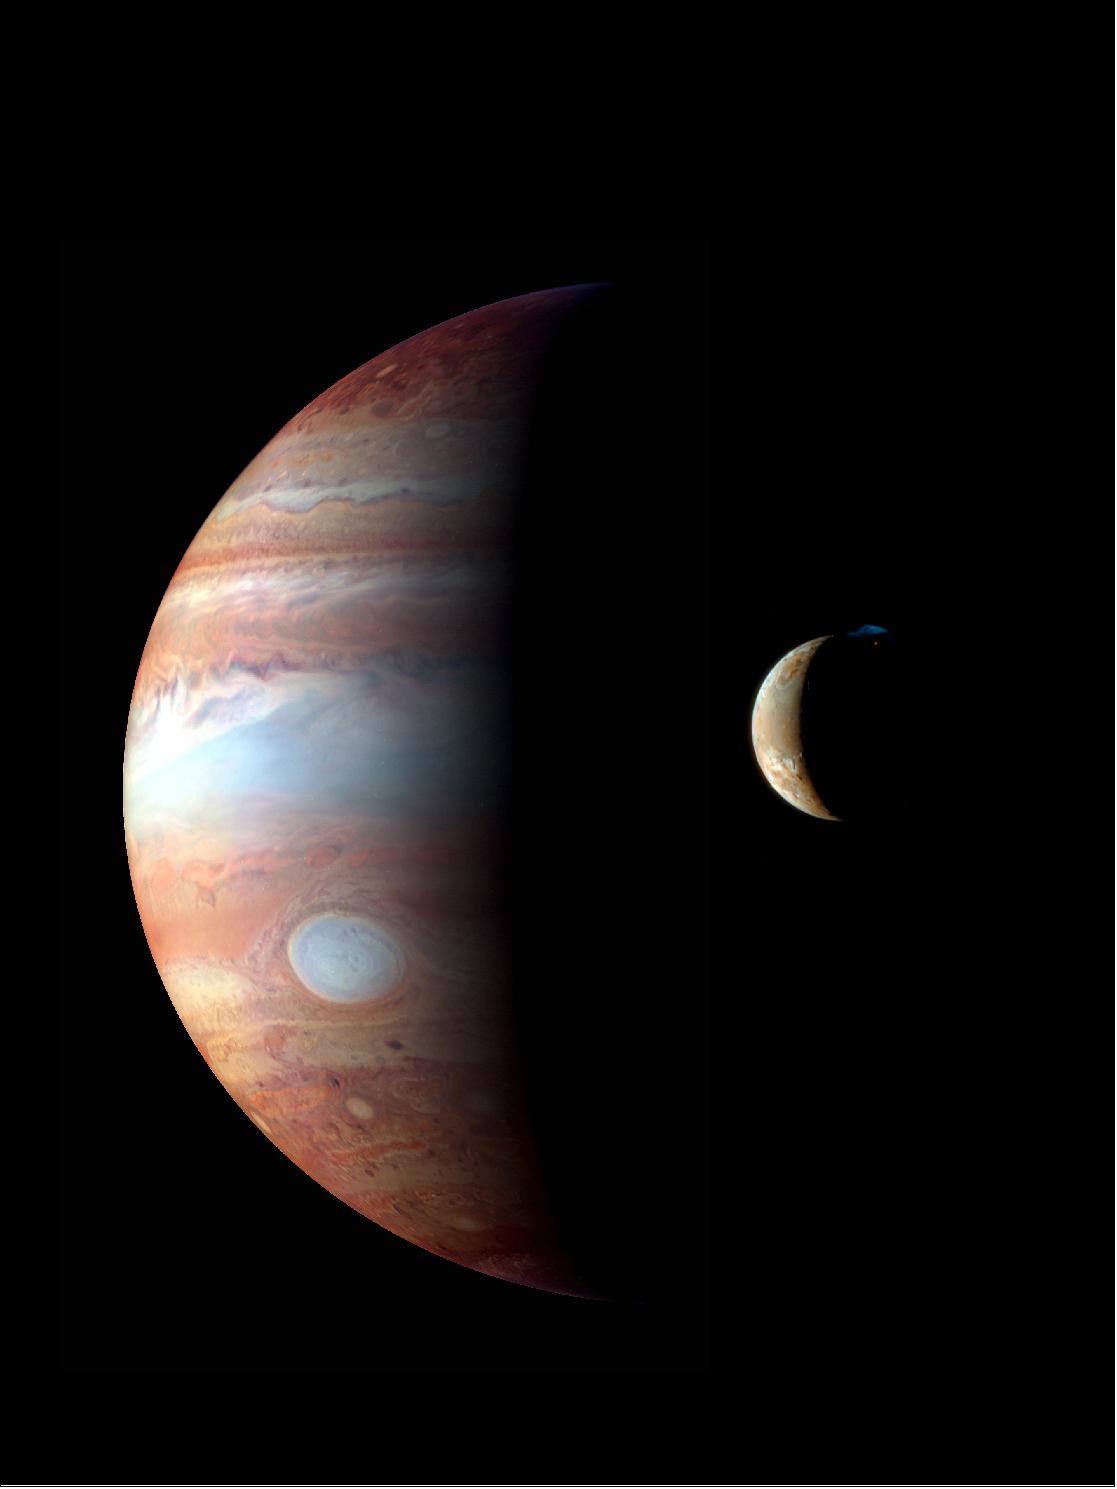 Figure 64: This is a montage of New Horizons images of Jupiter and its volcanic moon Io, taken during the spacecraft's Jupiter flyby in early 2007. The Jupiter image is an infrared color composite taken by the spacecraft's near-infrared imaging spectrometer, the Linear Etalon Imaging Spectral Array (LEISA) at 1:40 UTC on 28 February, 2007 (image credit: NASA, JHU/APL)